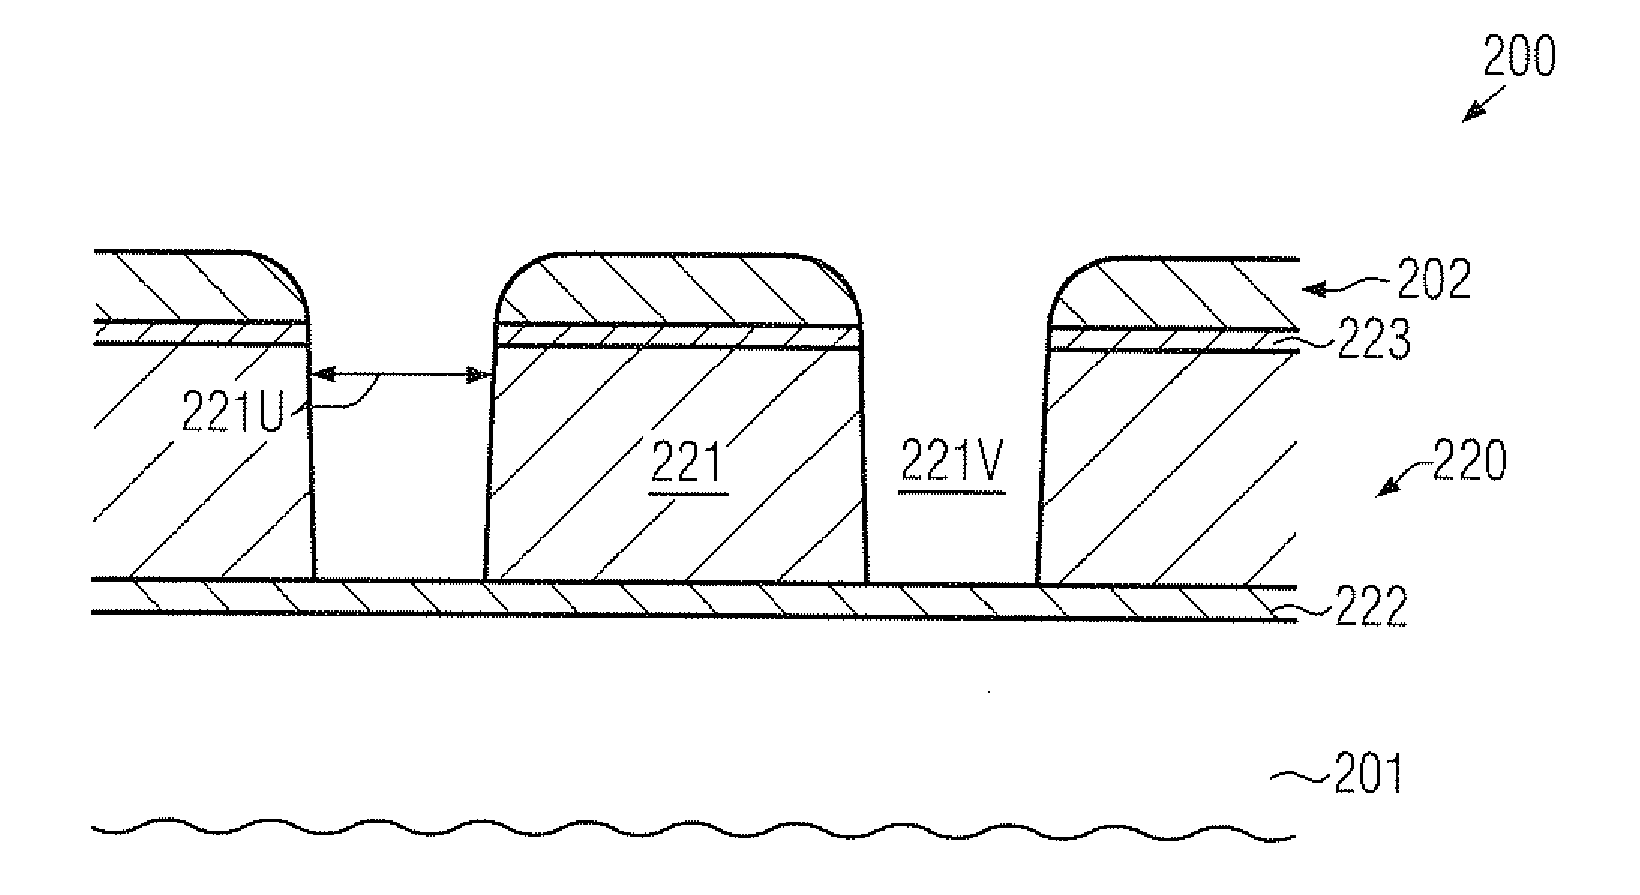 Metallization system of a semiconductor device comprising rounded interconnects formed by hard mask rounding